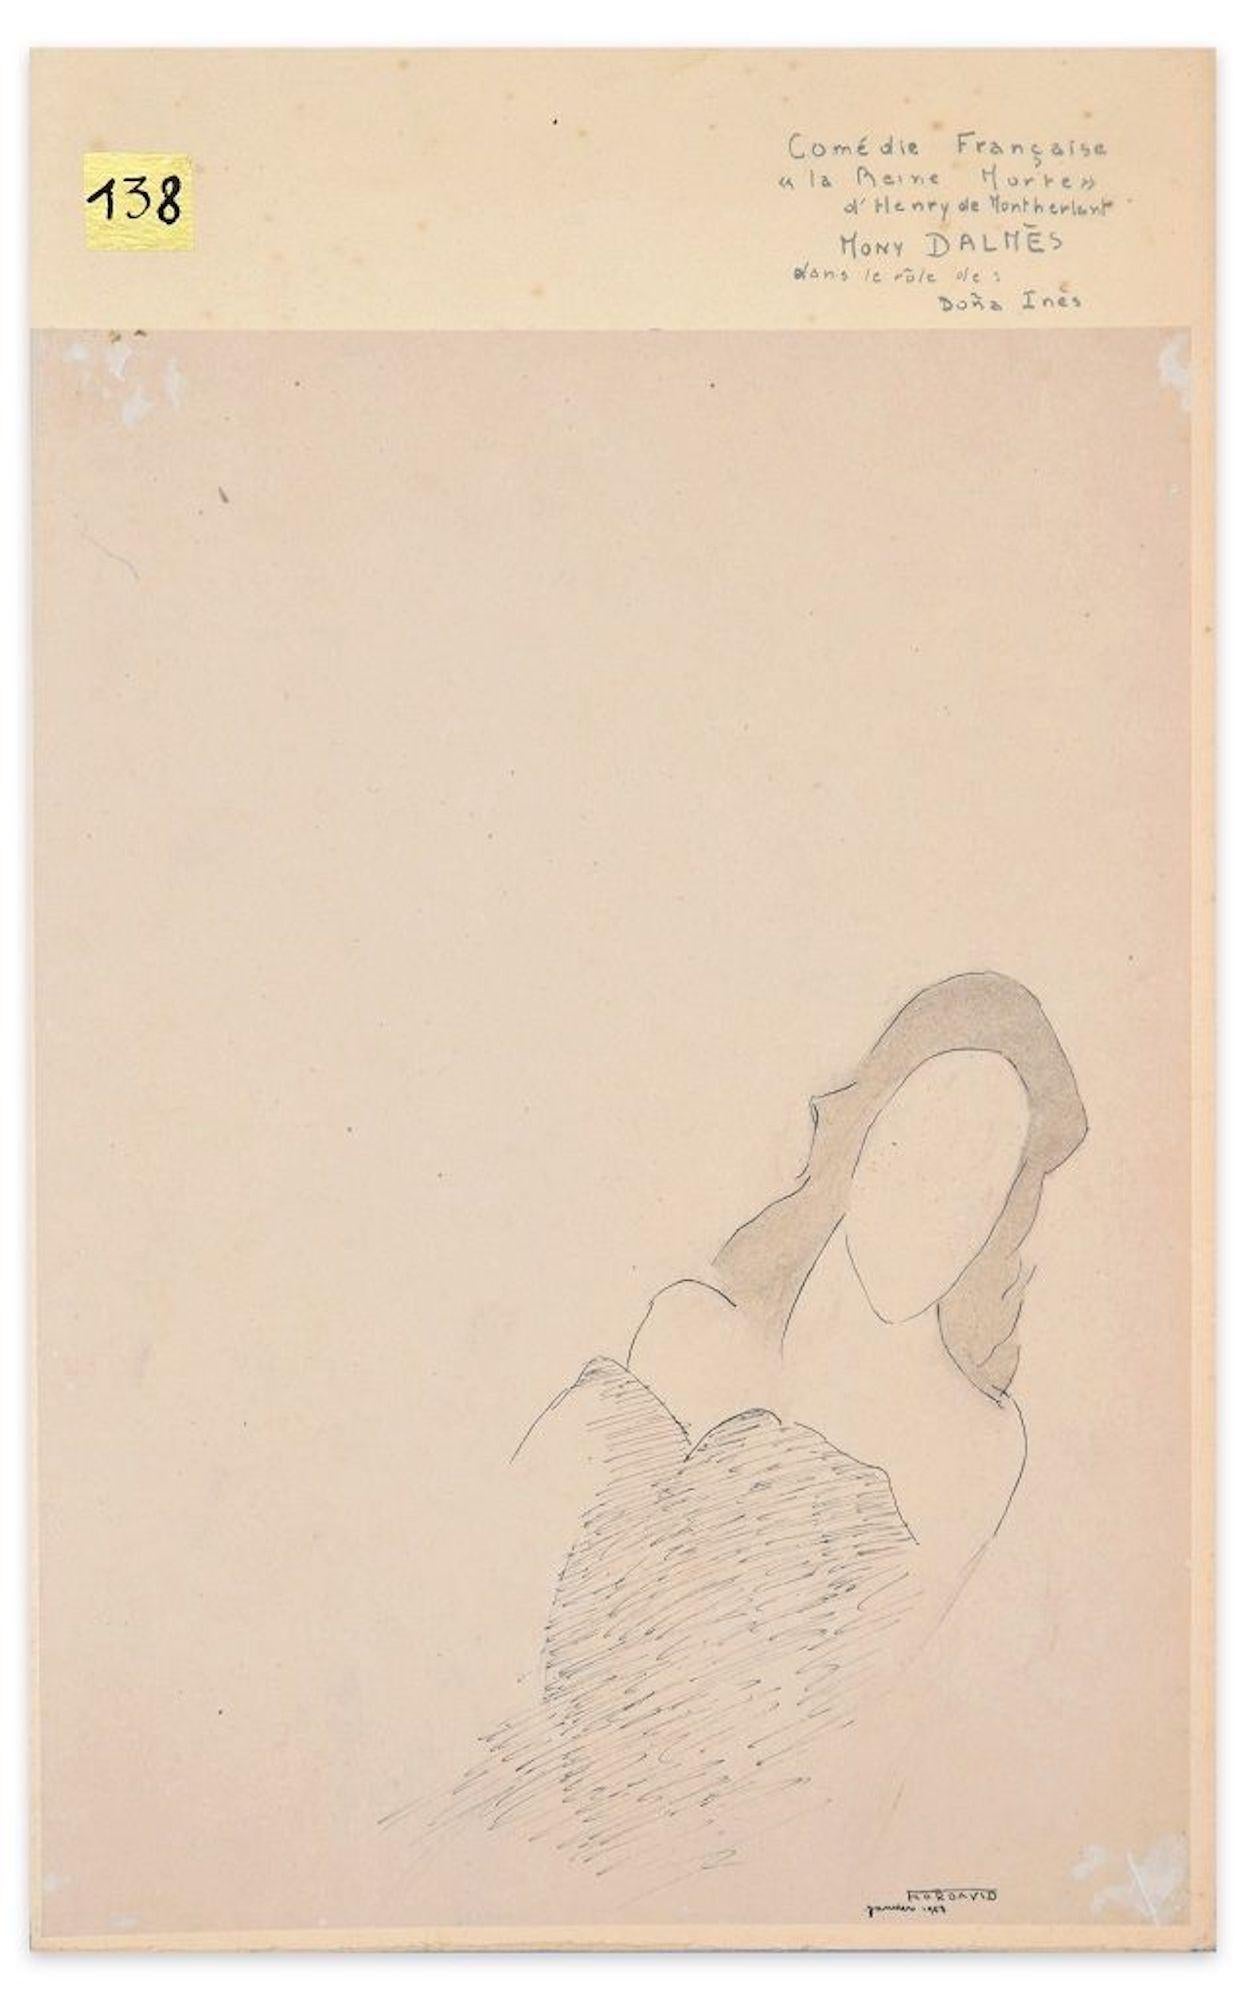 La Reine Morte is a superb original pencil and ink drawing on ivory glossy paper realized by Flor David in 1953.

Representing the silhouette of an elegant woman with a rapid and synthetic line and a wise touch, this original drawing seems to be the